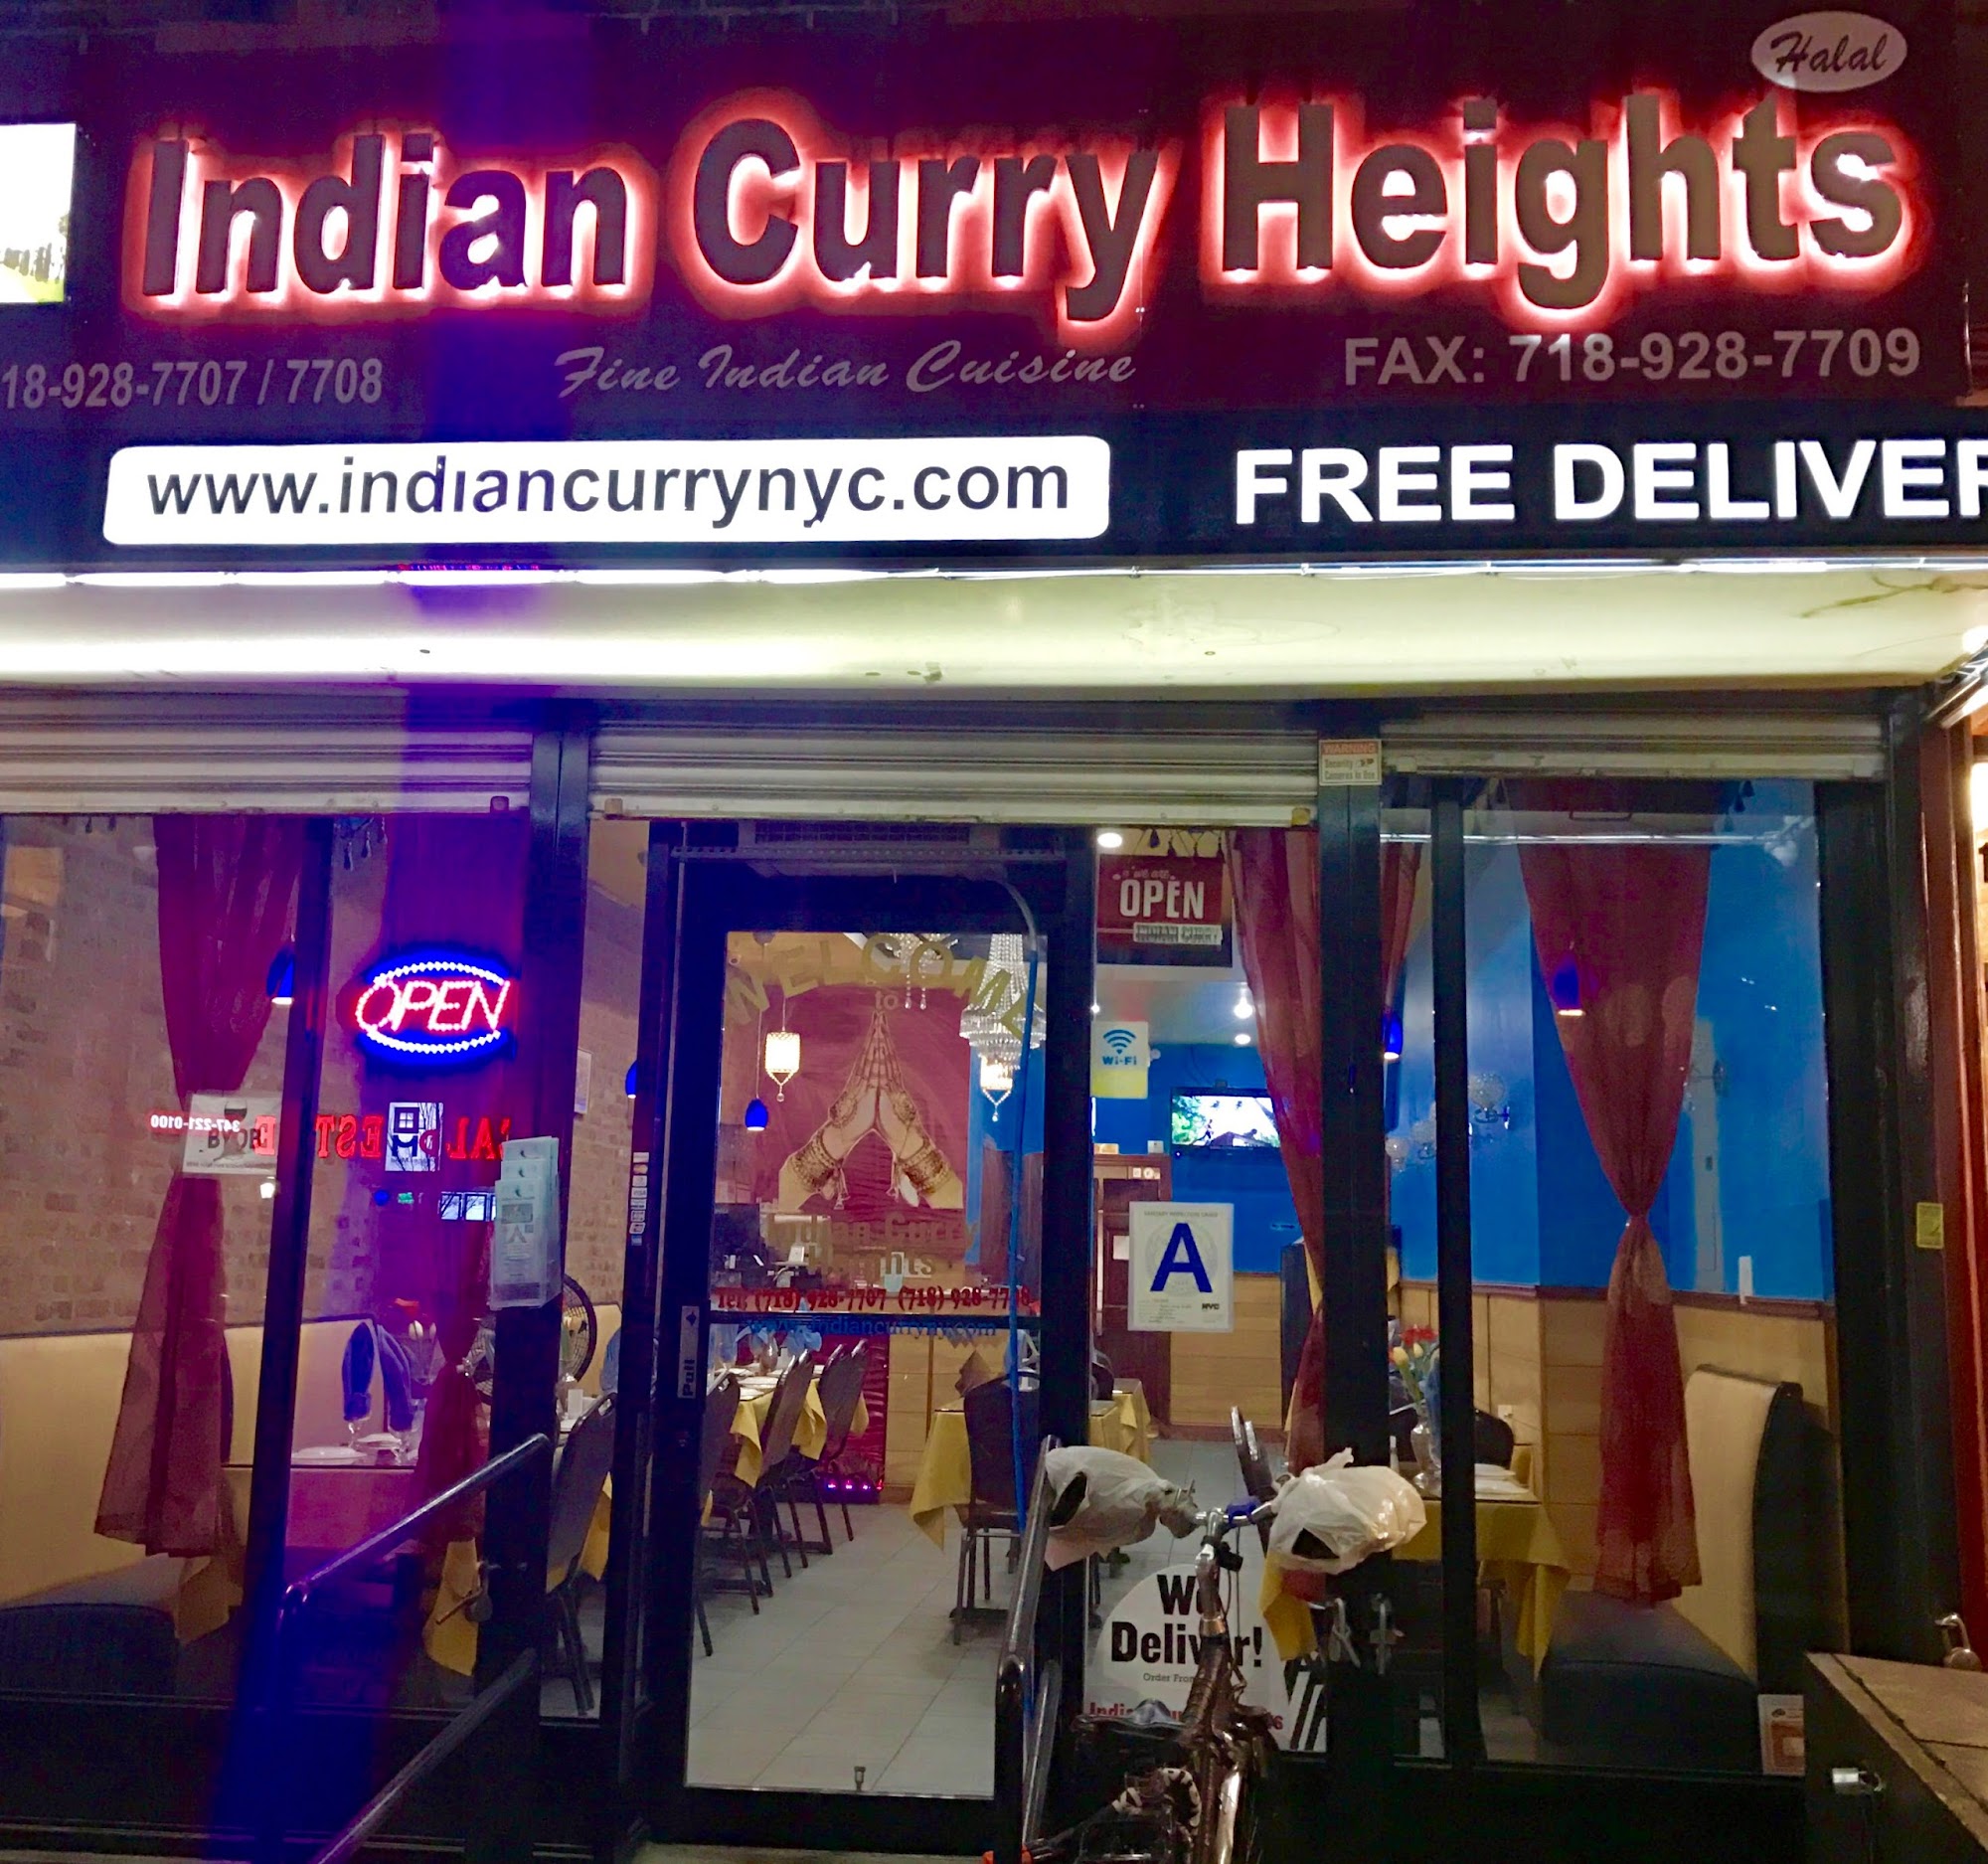 Indian Curry Heights